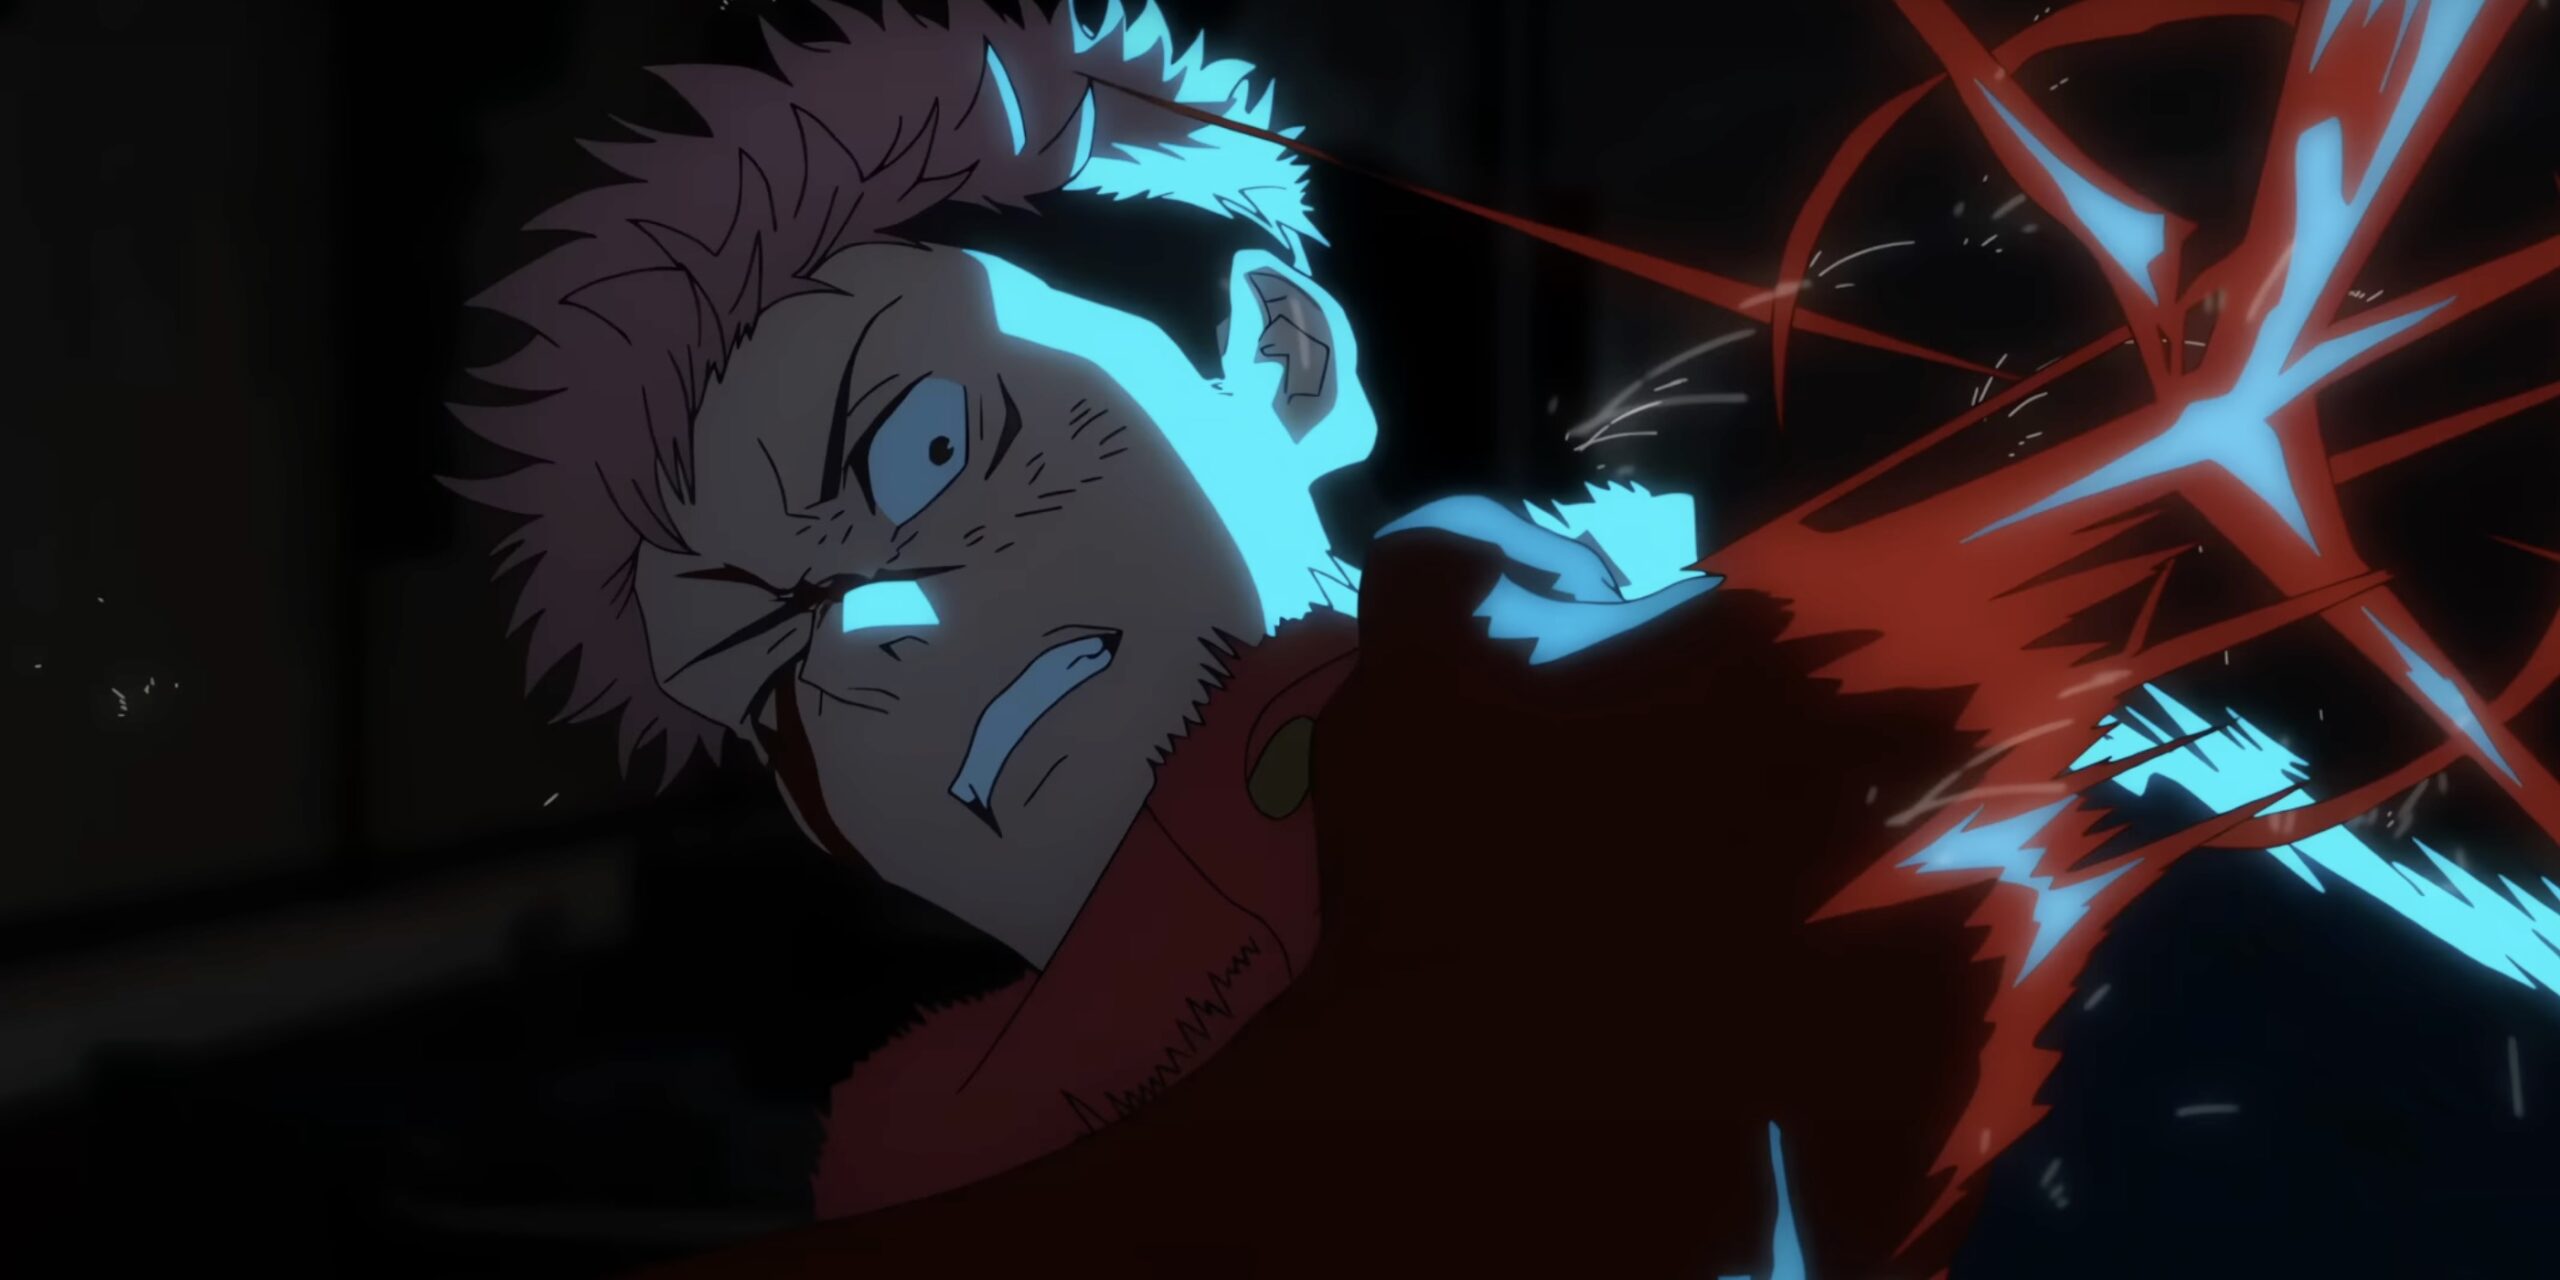 Jujutsu Kaisen Season 2 Wouldn't Have Happened Without This Person